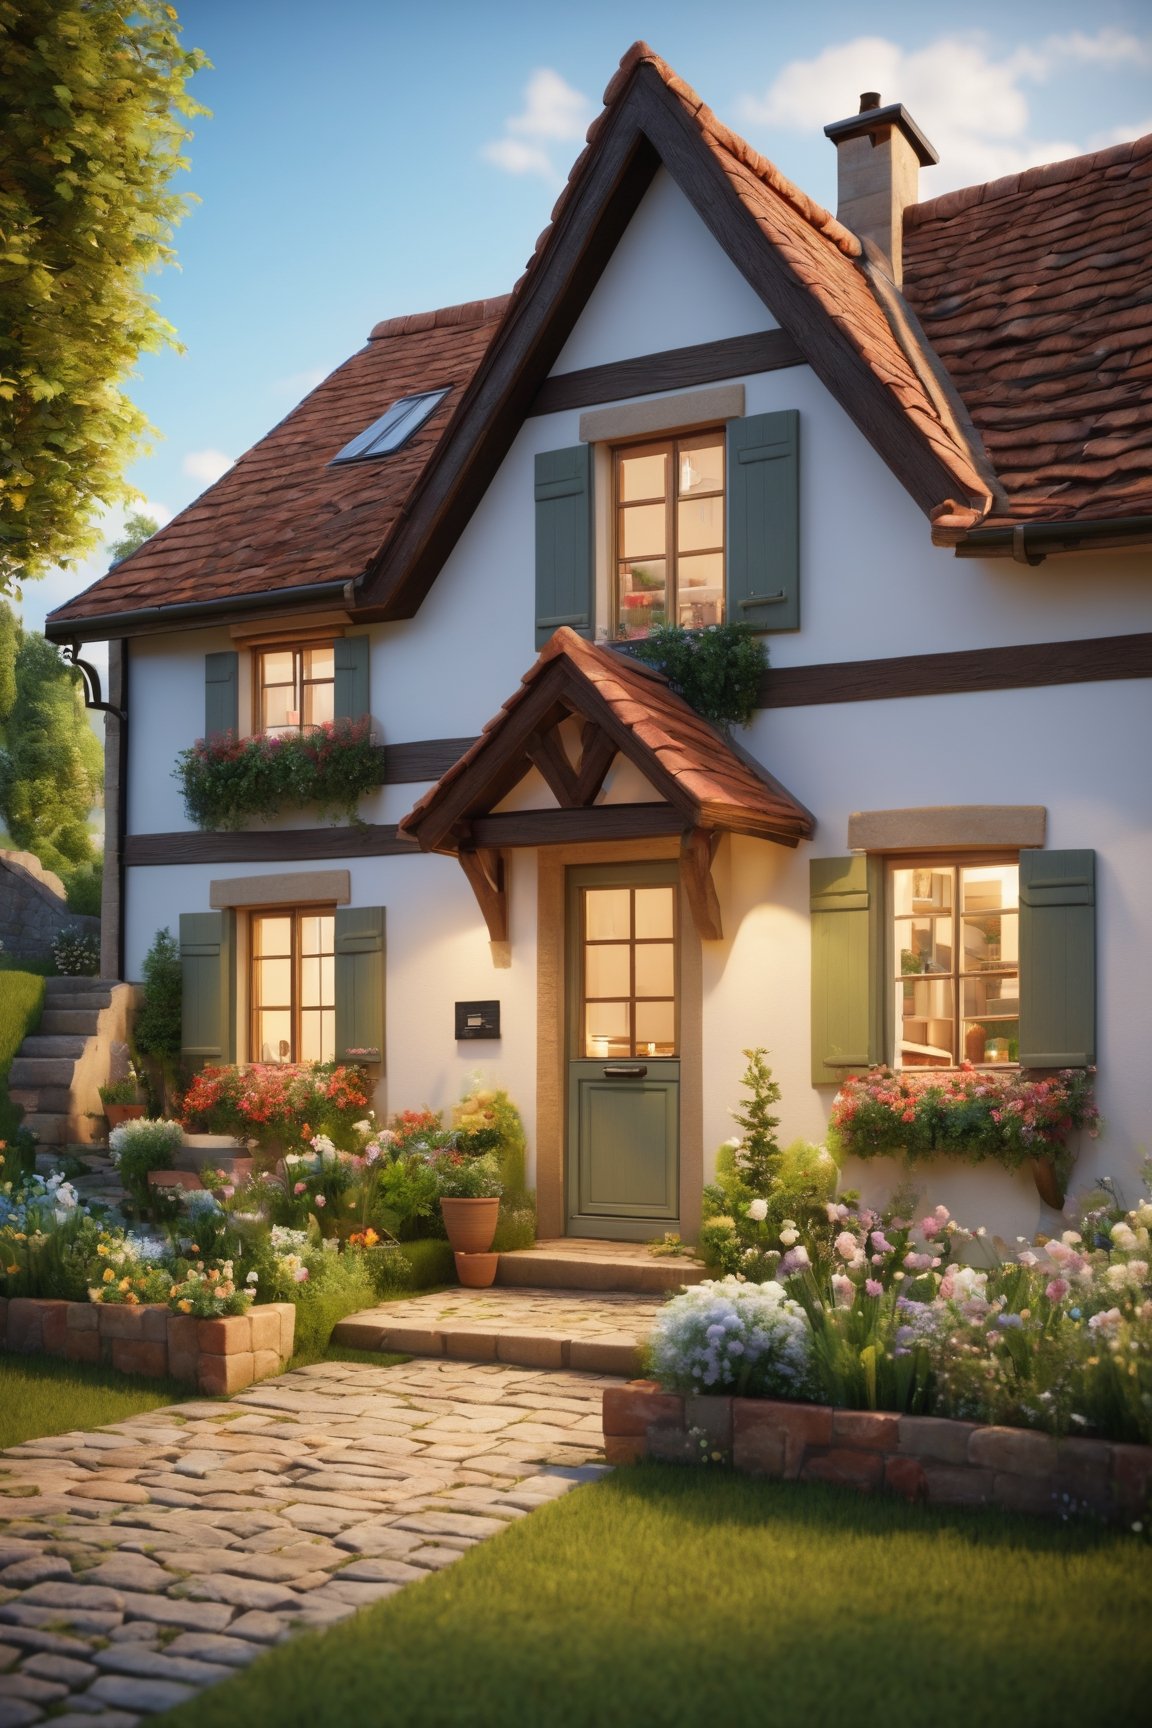 Inviting 3D render, depicting a cozy house nestled in a quaint village setting. The house exudes warmth and comfort, with a charming exterior and well-tended garden. Surrounding houses and village scenery add to the picturesque atmosphere, enhancing the sense of community. Every architectural detail is carefully crafted to evoke a feeling of homeliness and tranquility